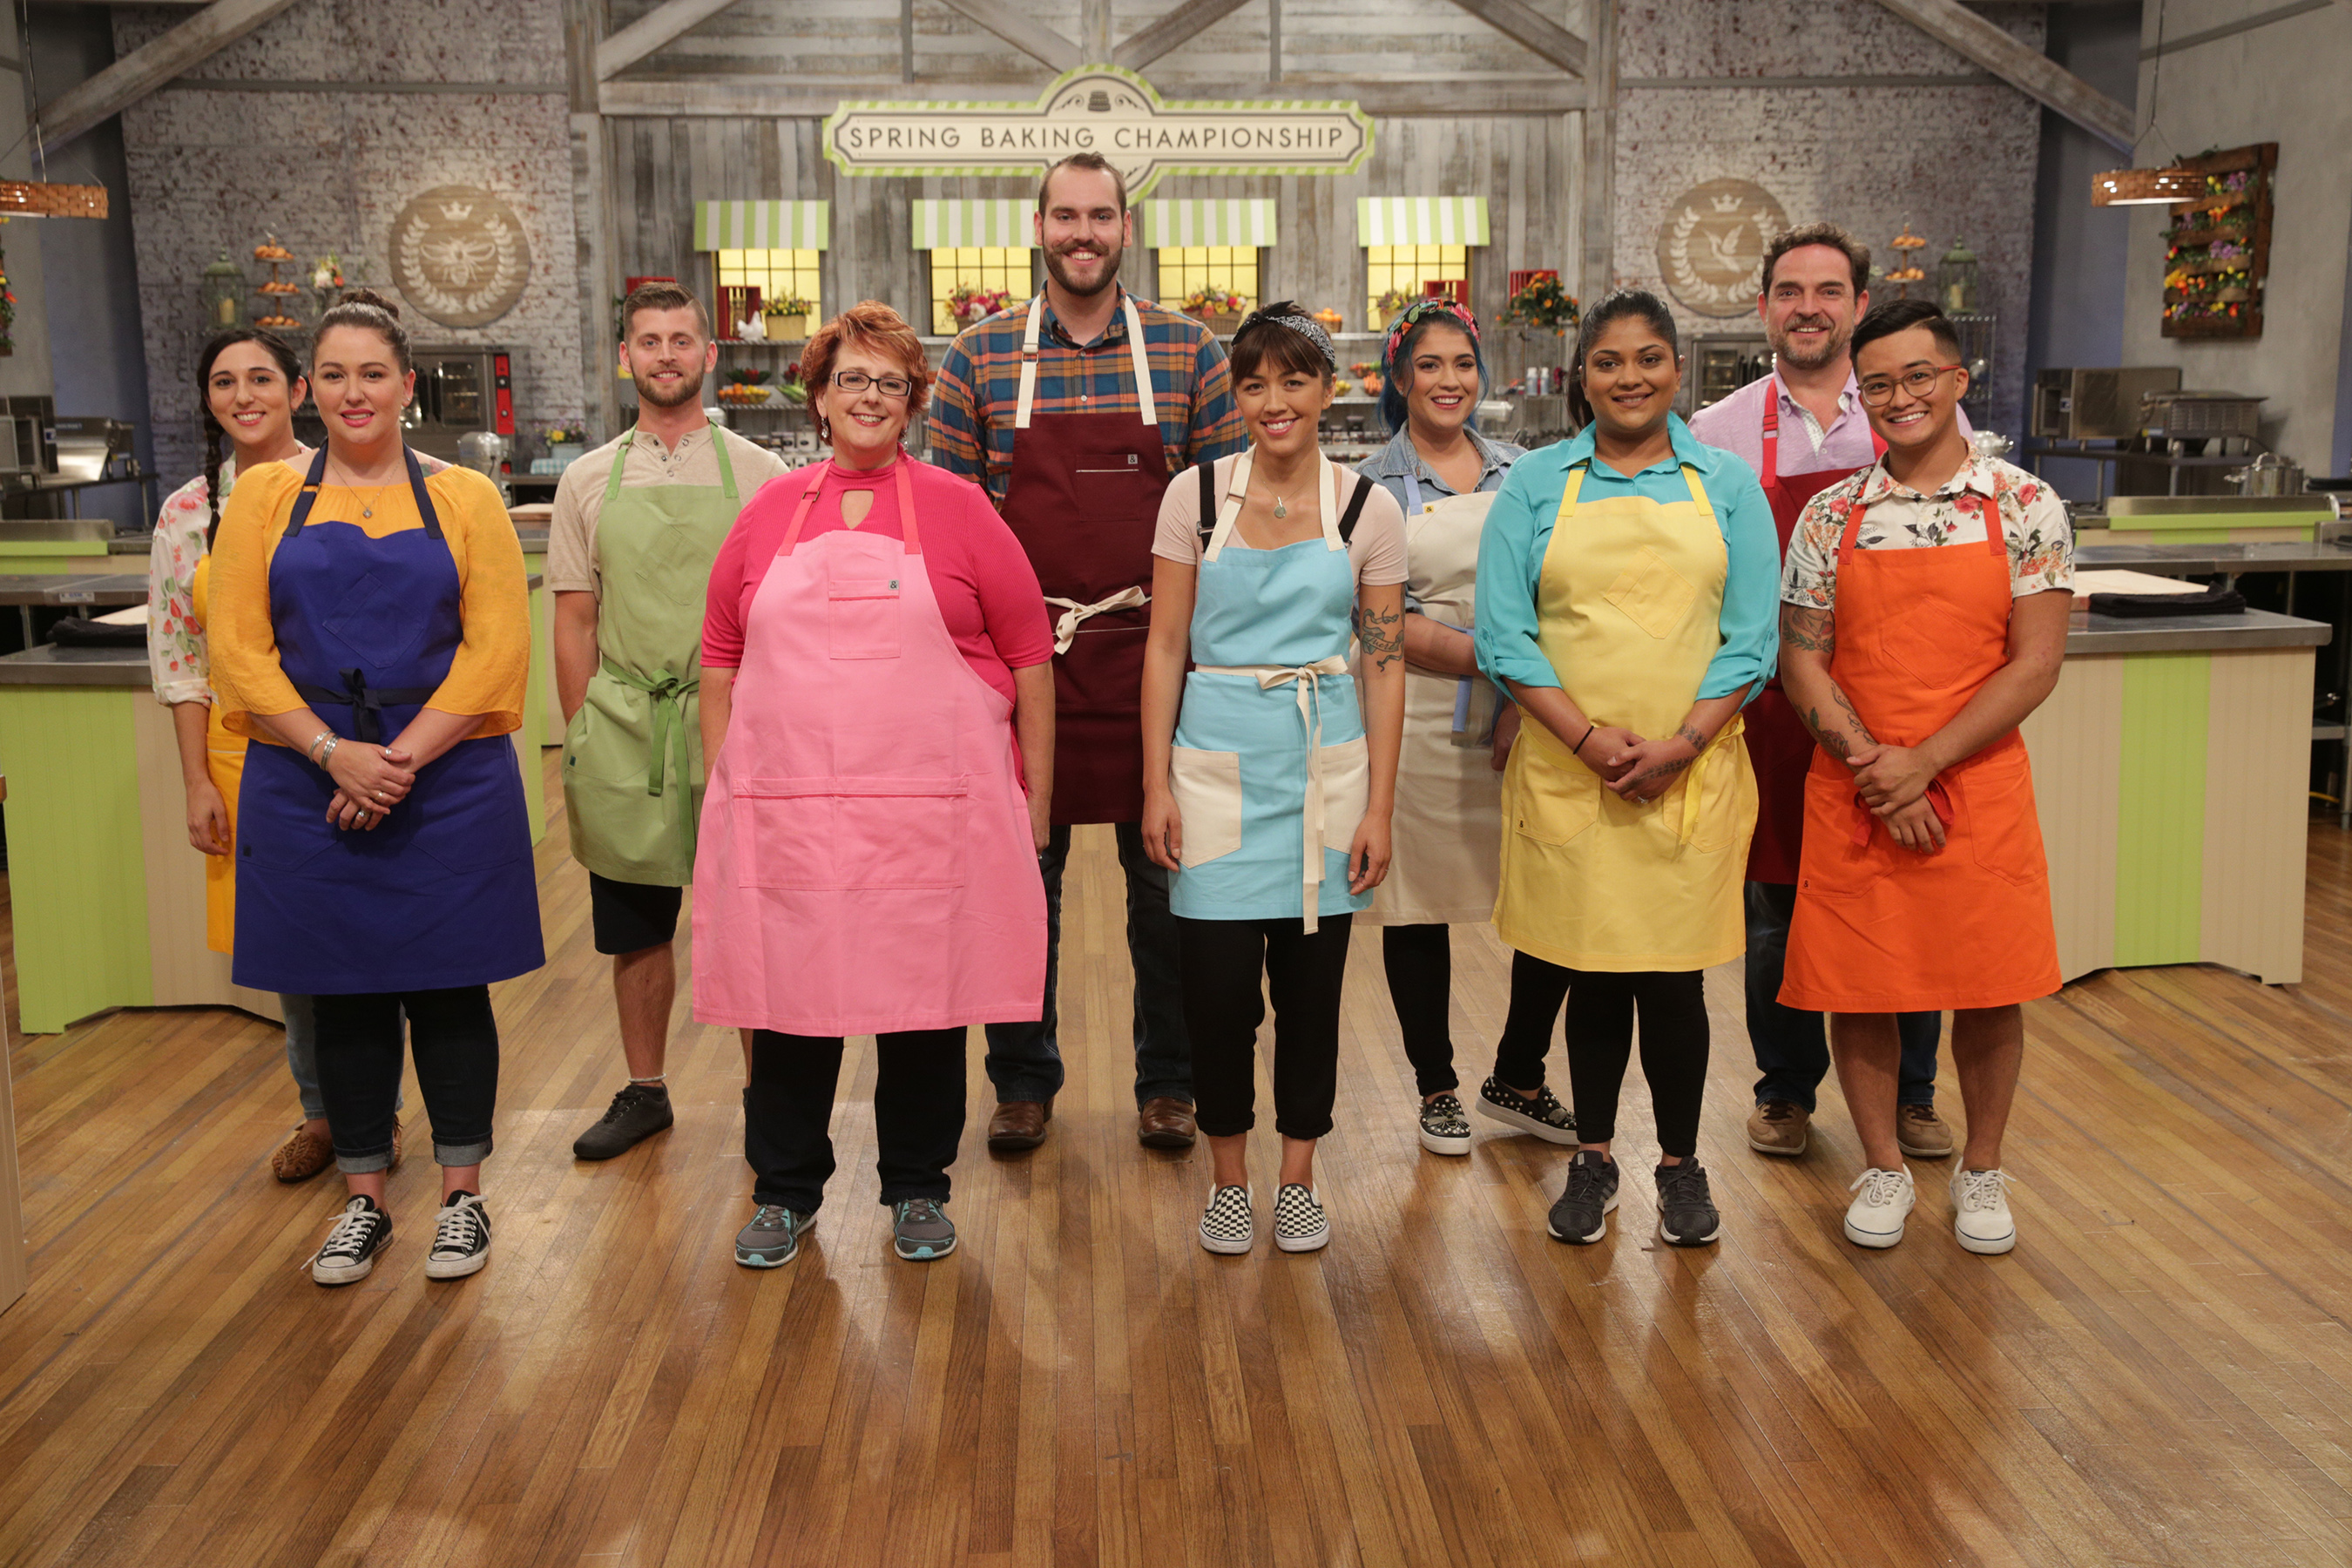 SPRING BAKING CHAMPIONSHIP RETURNS TO MONDAY NIGHTS IN MARCH